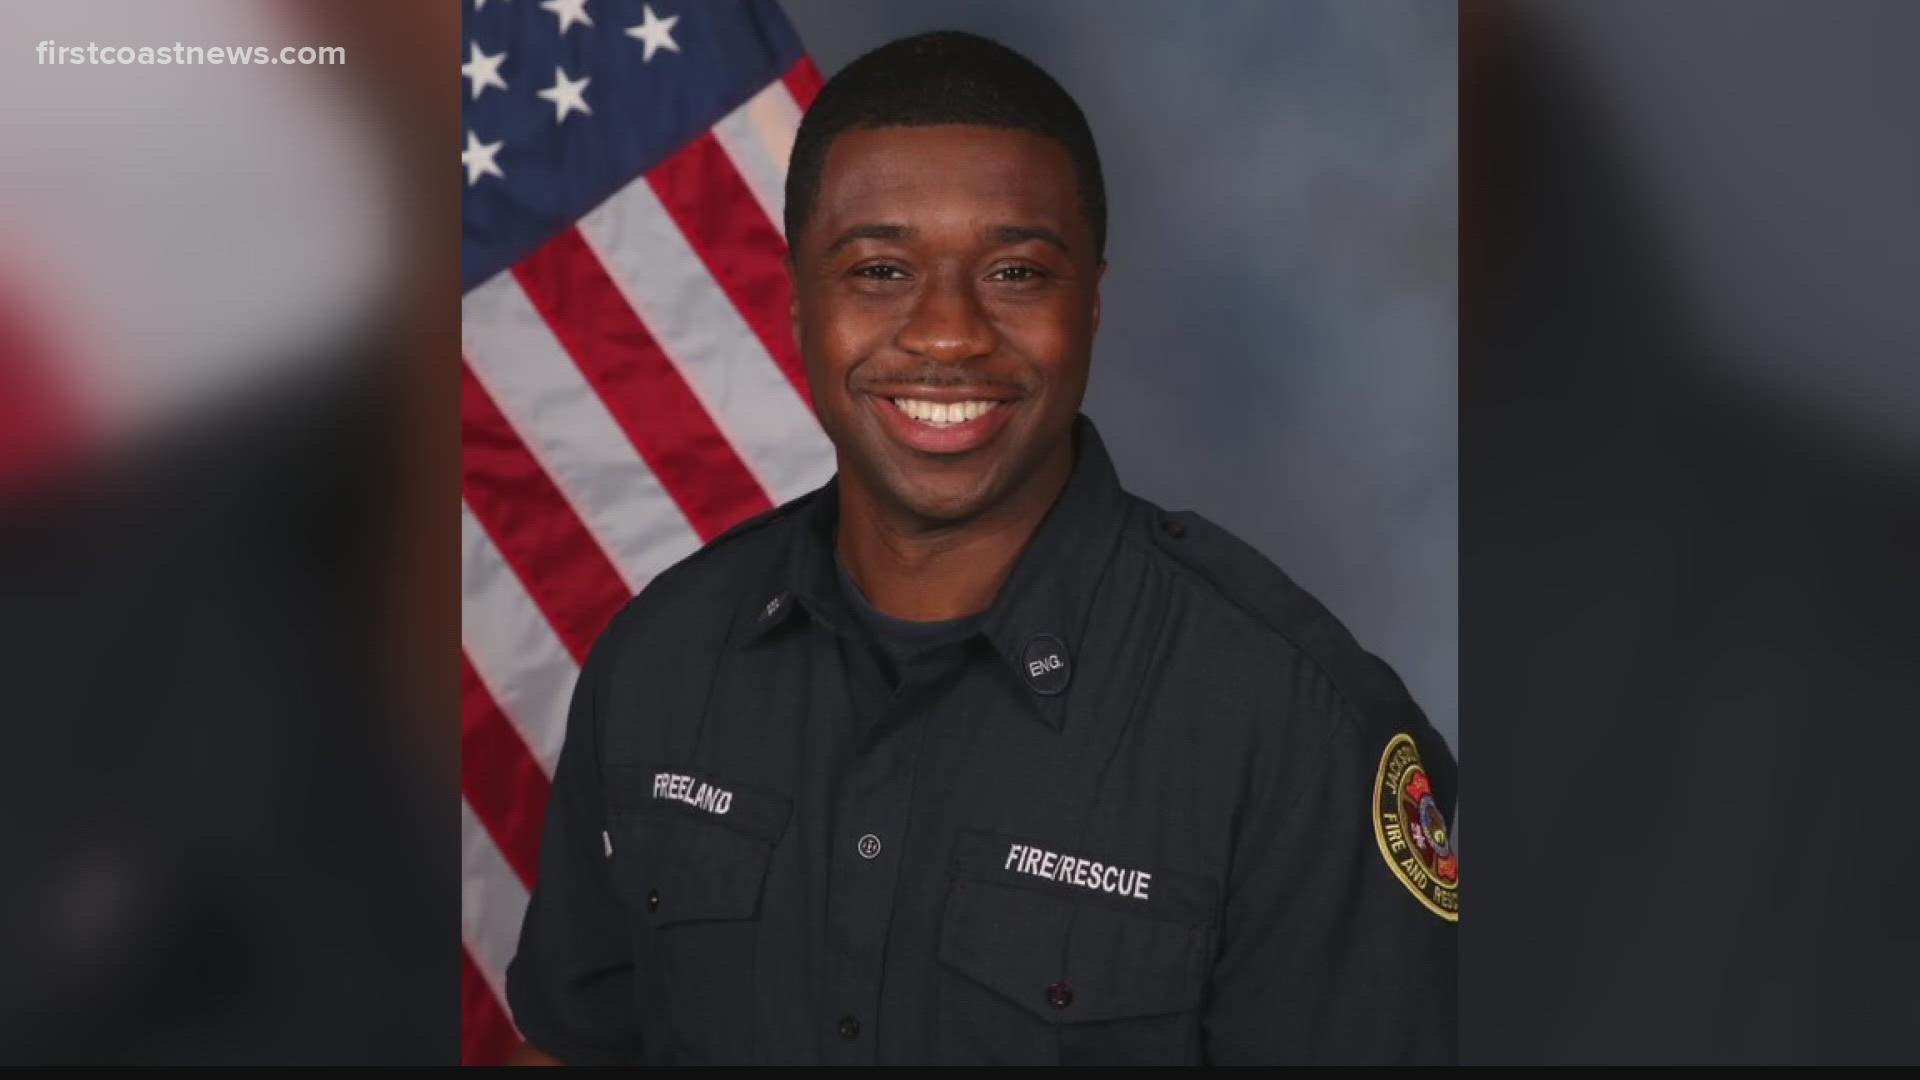 The Jacksonville Fire Rescue Department says a firefighter working a crash with a prolonged extrication was pronounced dead at UF Health Thursday morning.